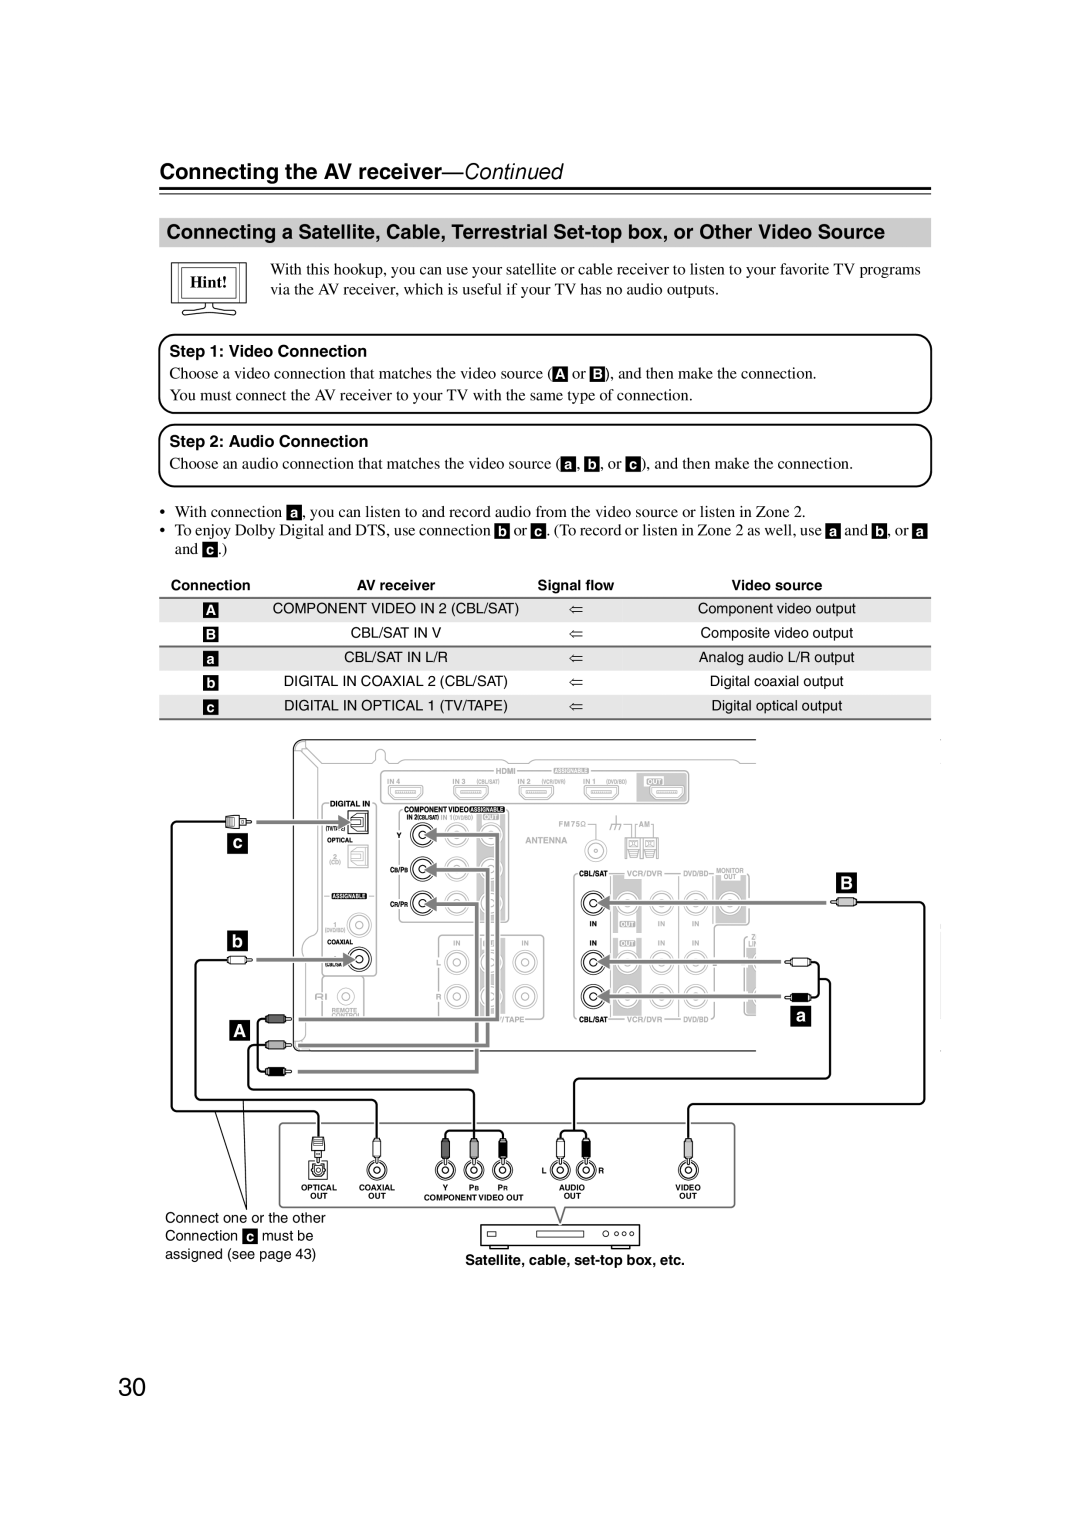 Onkyo TX-SR577, SR507 instruction manual Connecting the AV receiver—Continued, Hint, COMPONENT VIDEO IN 2 CBL/SAT 